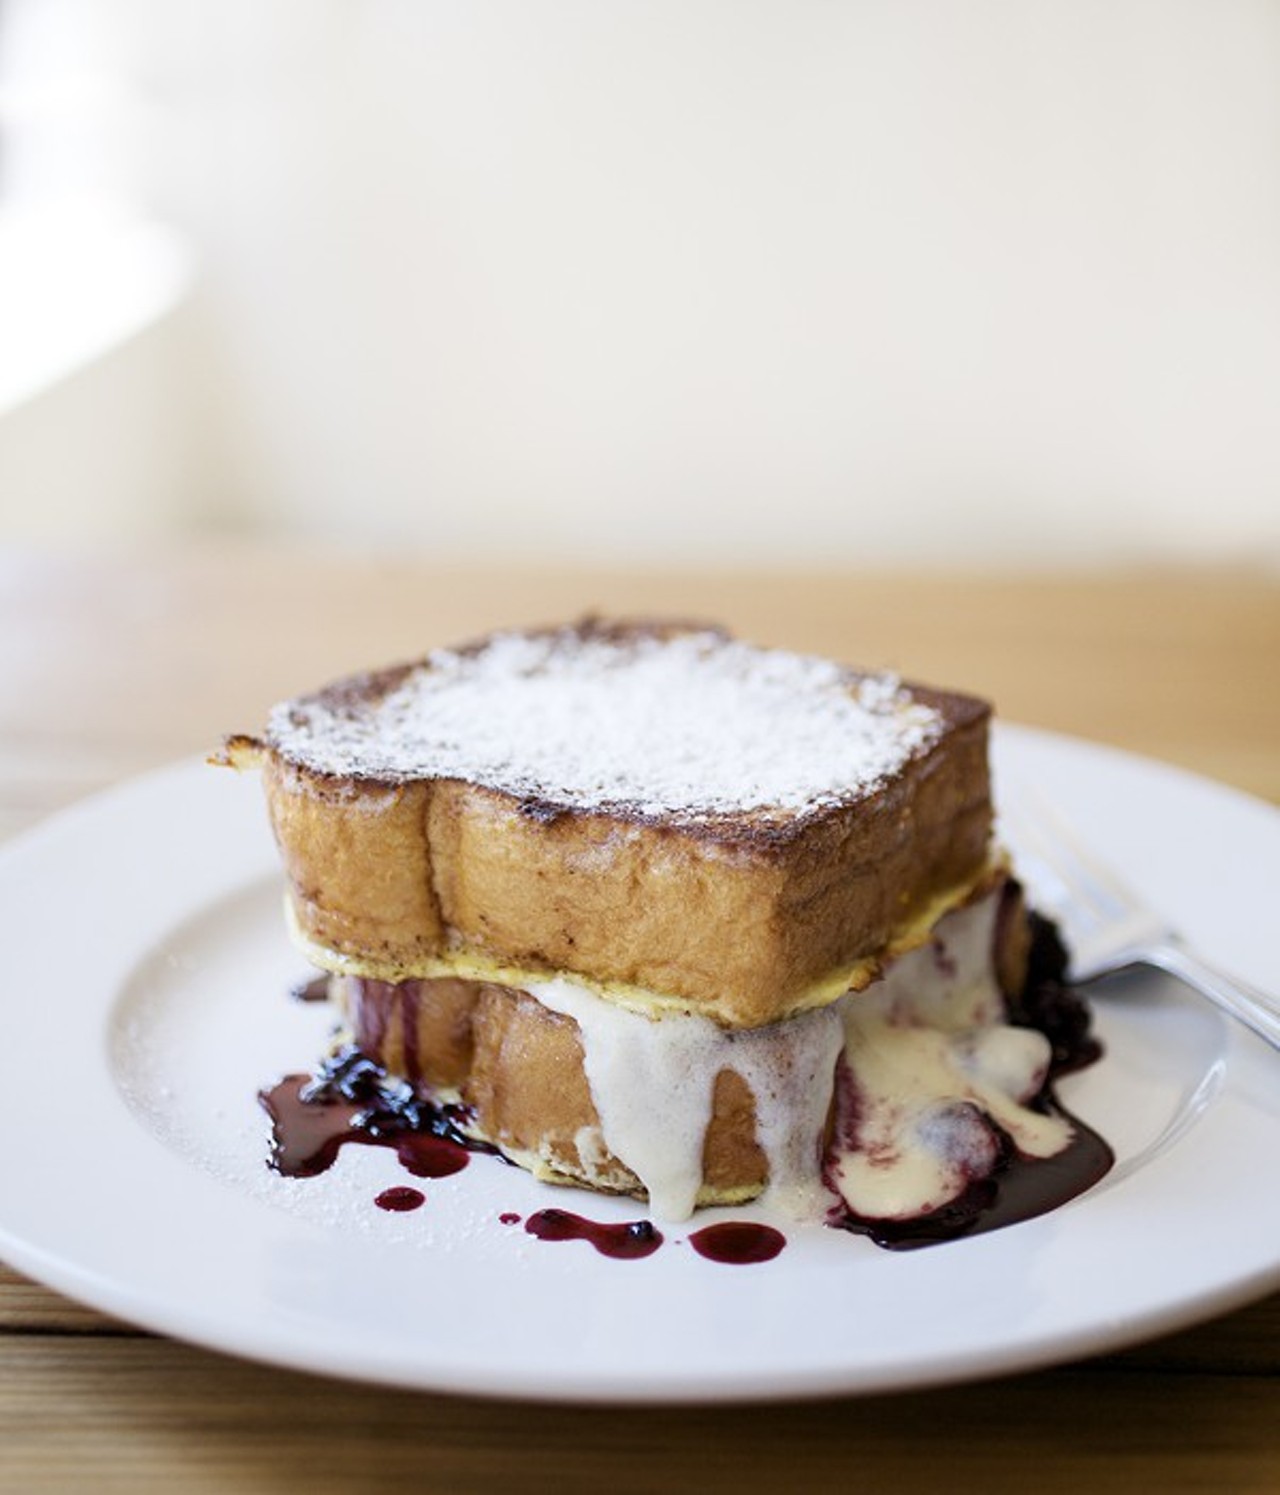 The bread is crucial to Half & Half's famed French toast. Photo by Jennifer Silverberg.